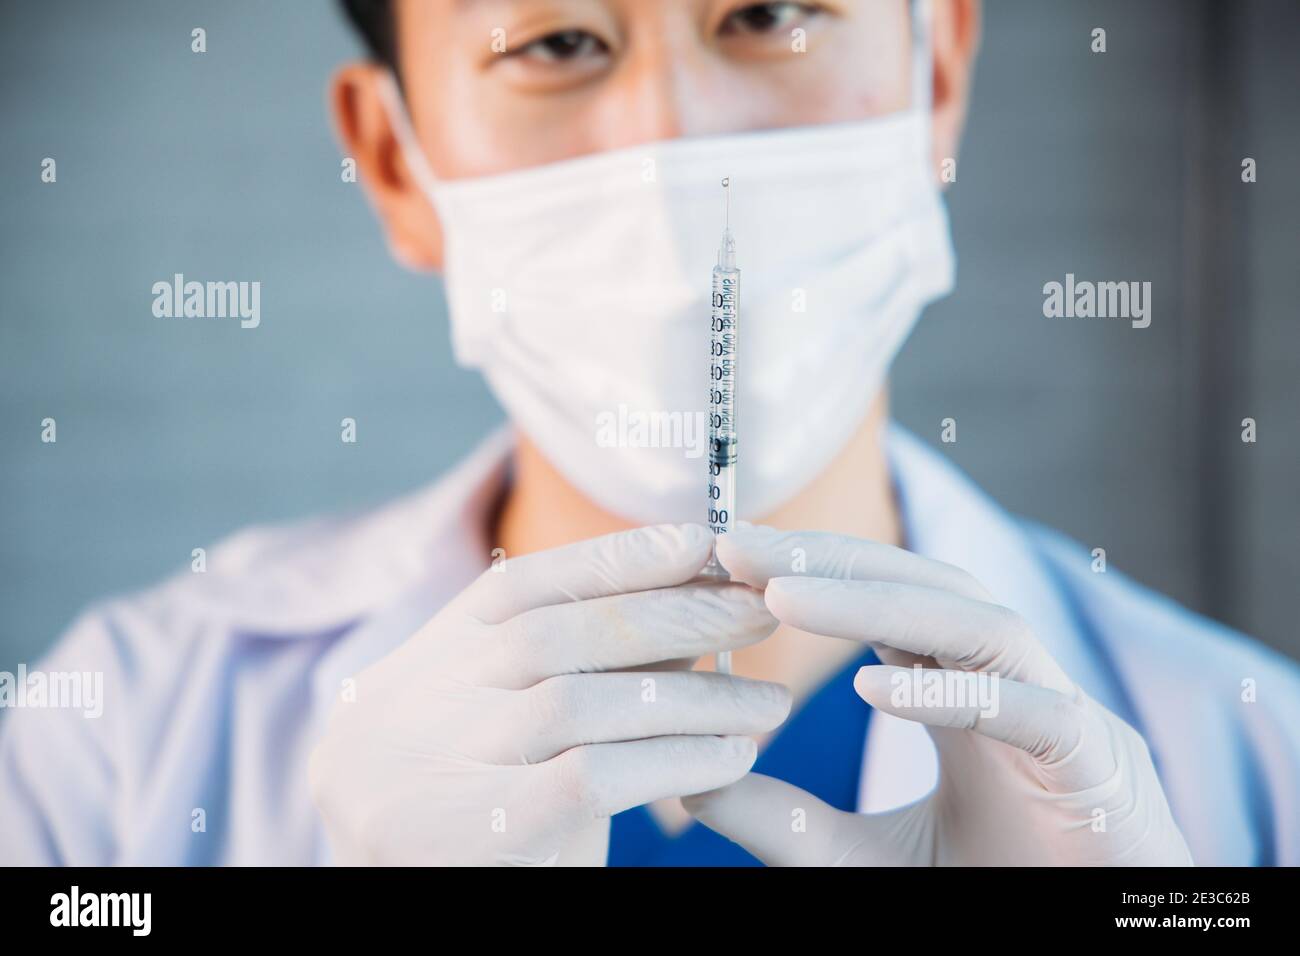 Close up of male Asian doctor holding a vaccine injection needle ready for vaccination. Young lab technician scientist at work Stock Photo